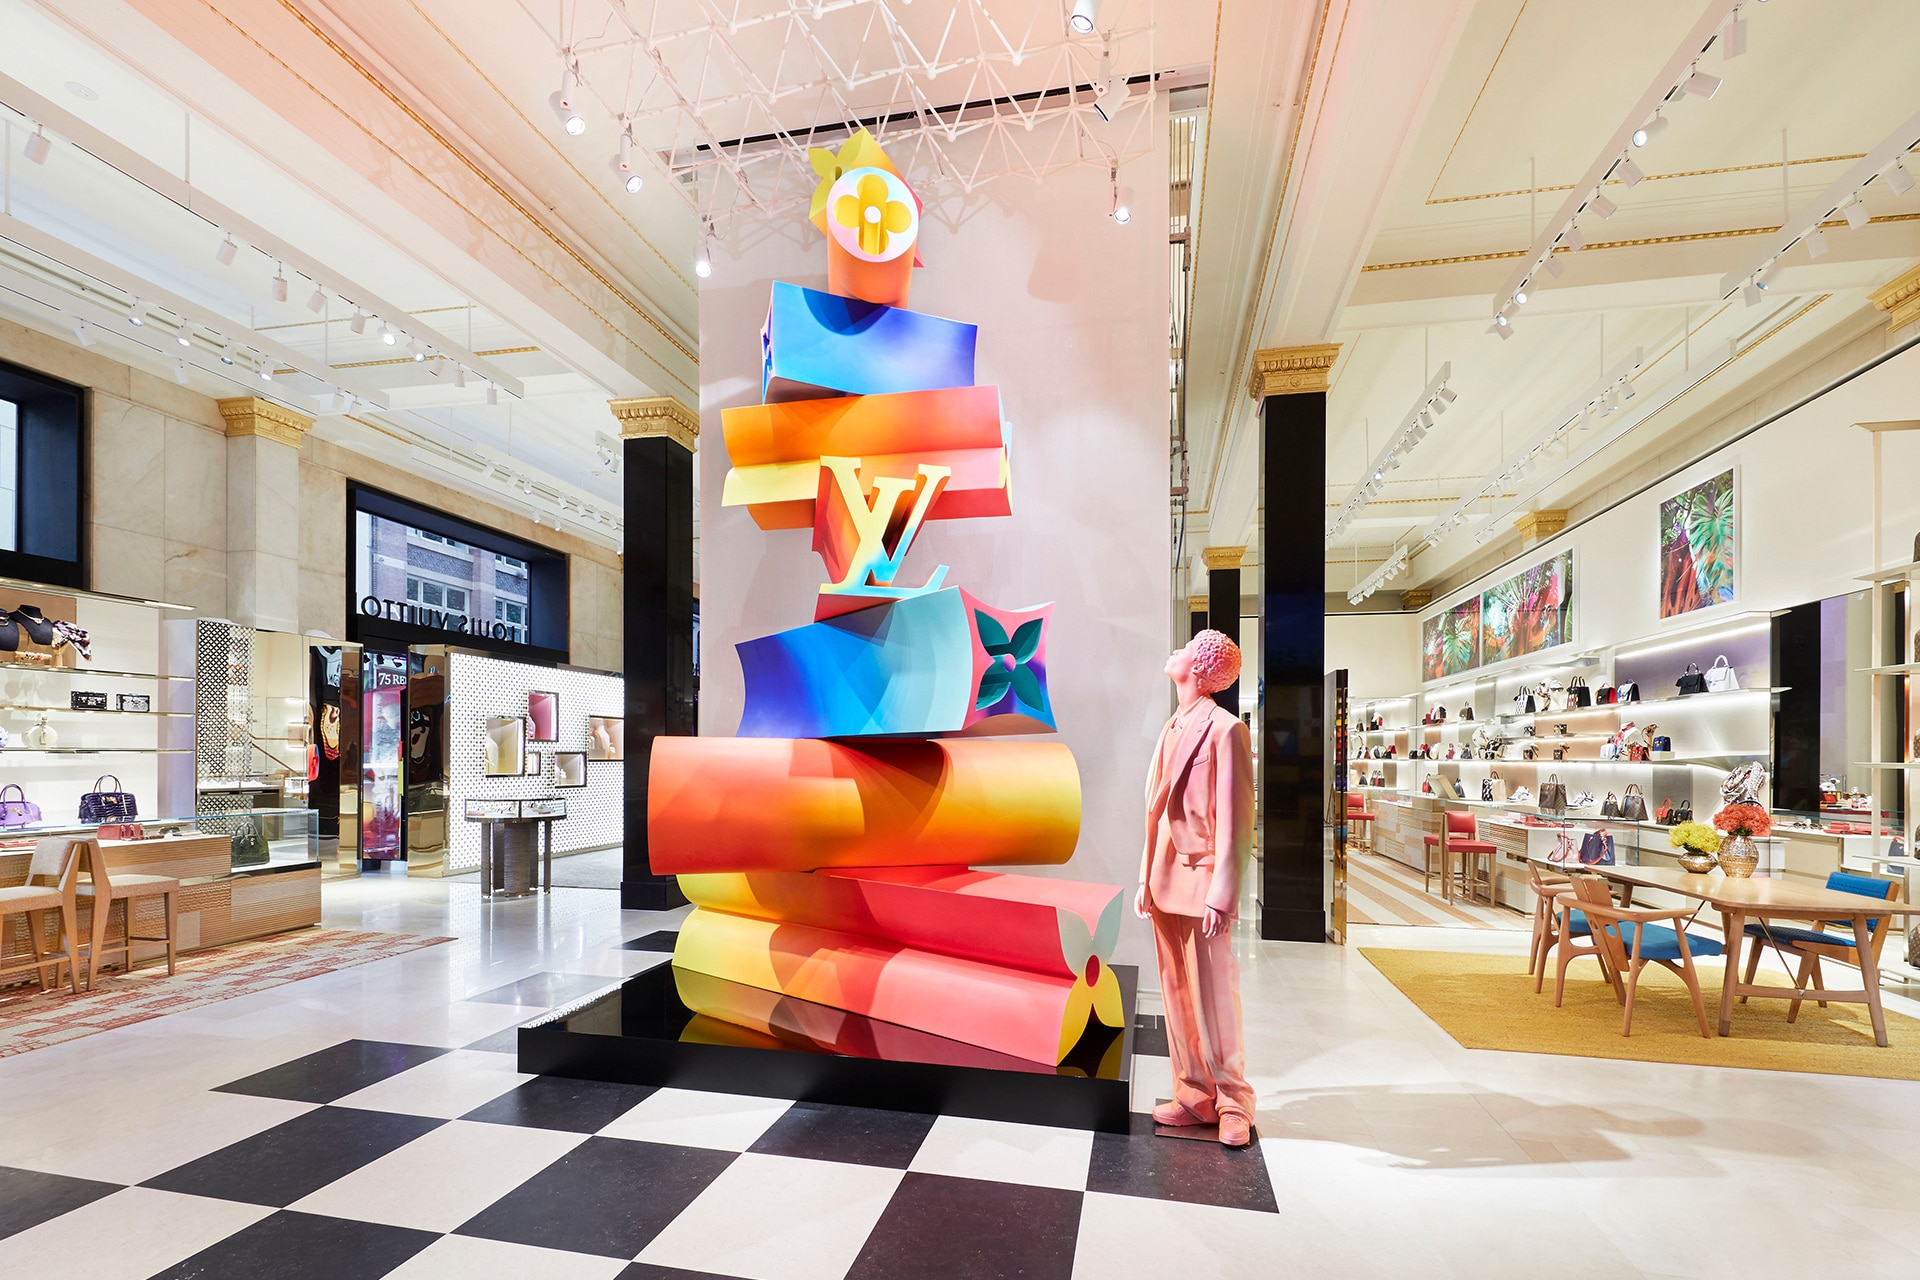 Peek Inside the World of Louis Vuitton with SEE LV Sydney